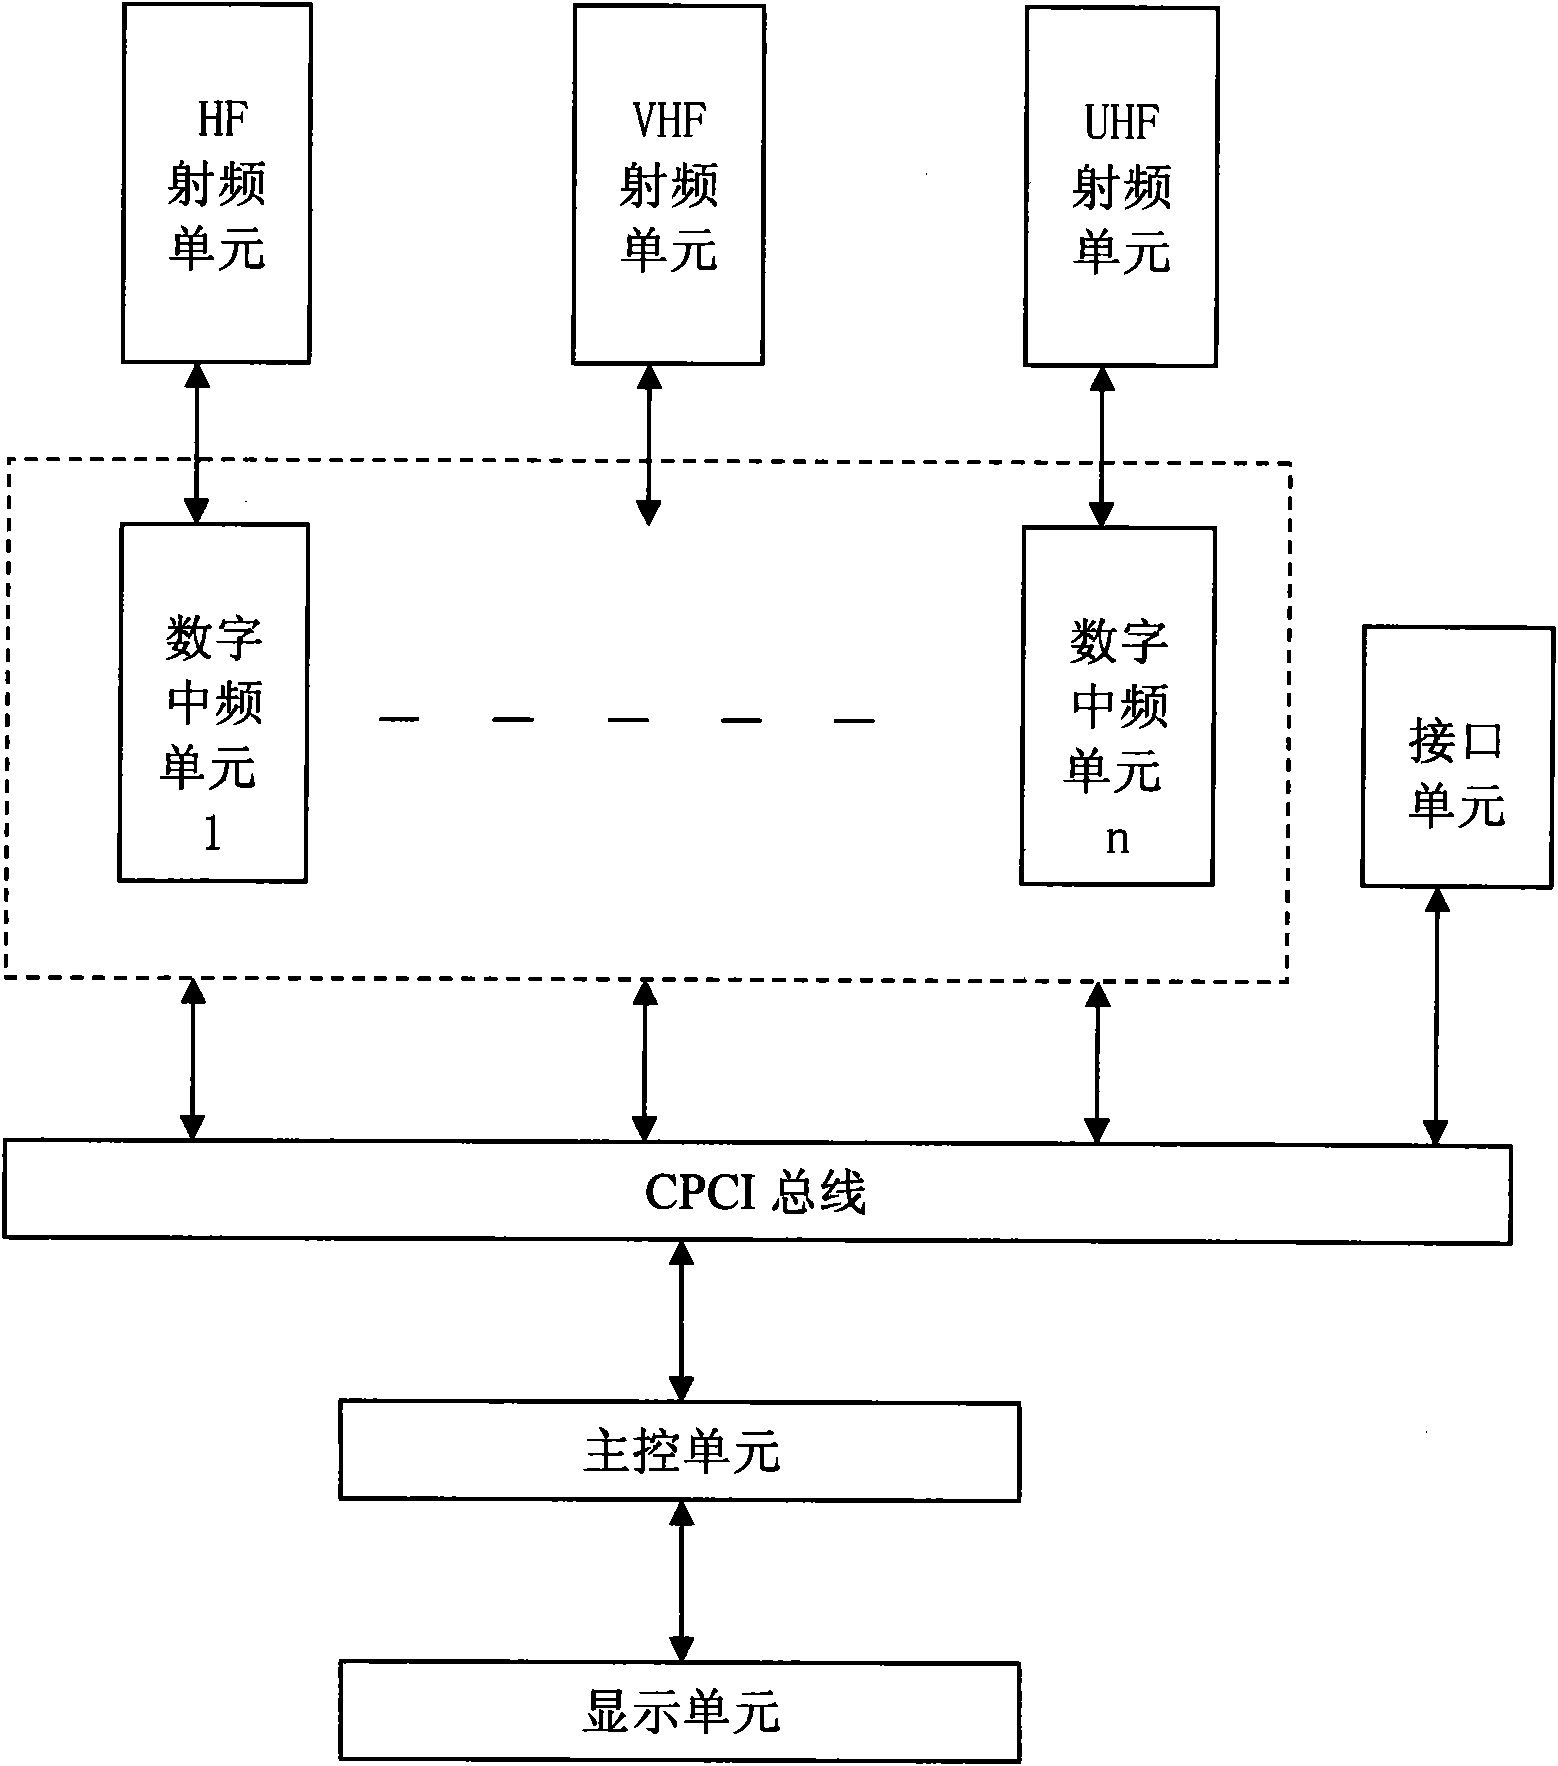 Software radio-based wide frequency range direction of arrival identifying equipment